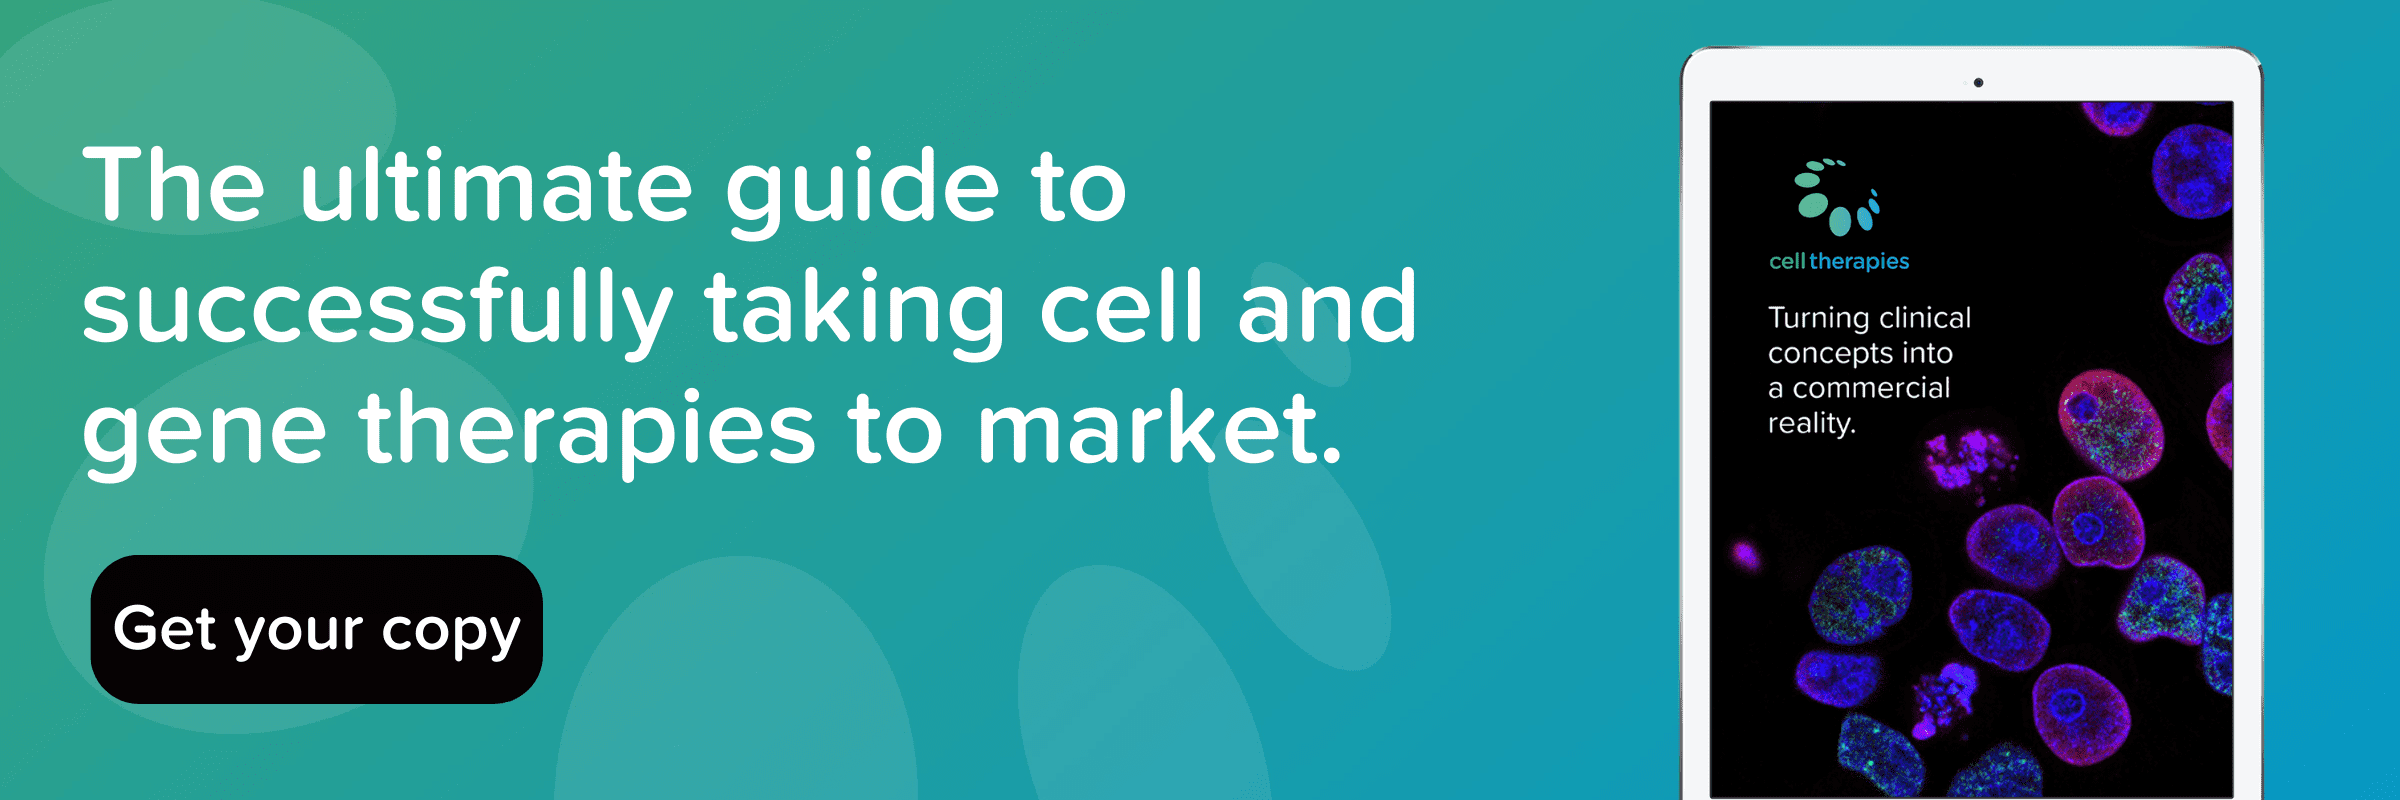 The ultimate guide to successfully taking cell and gene therapies to market